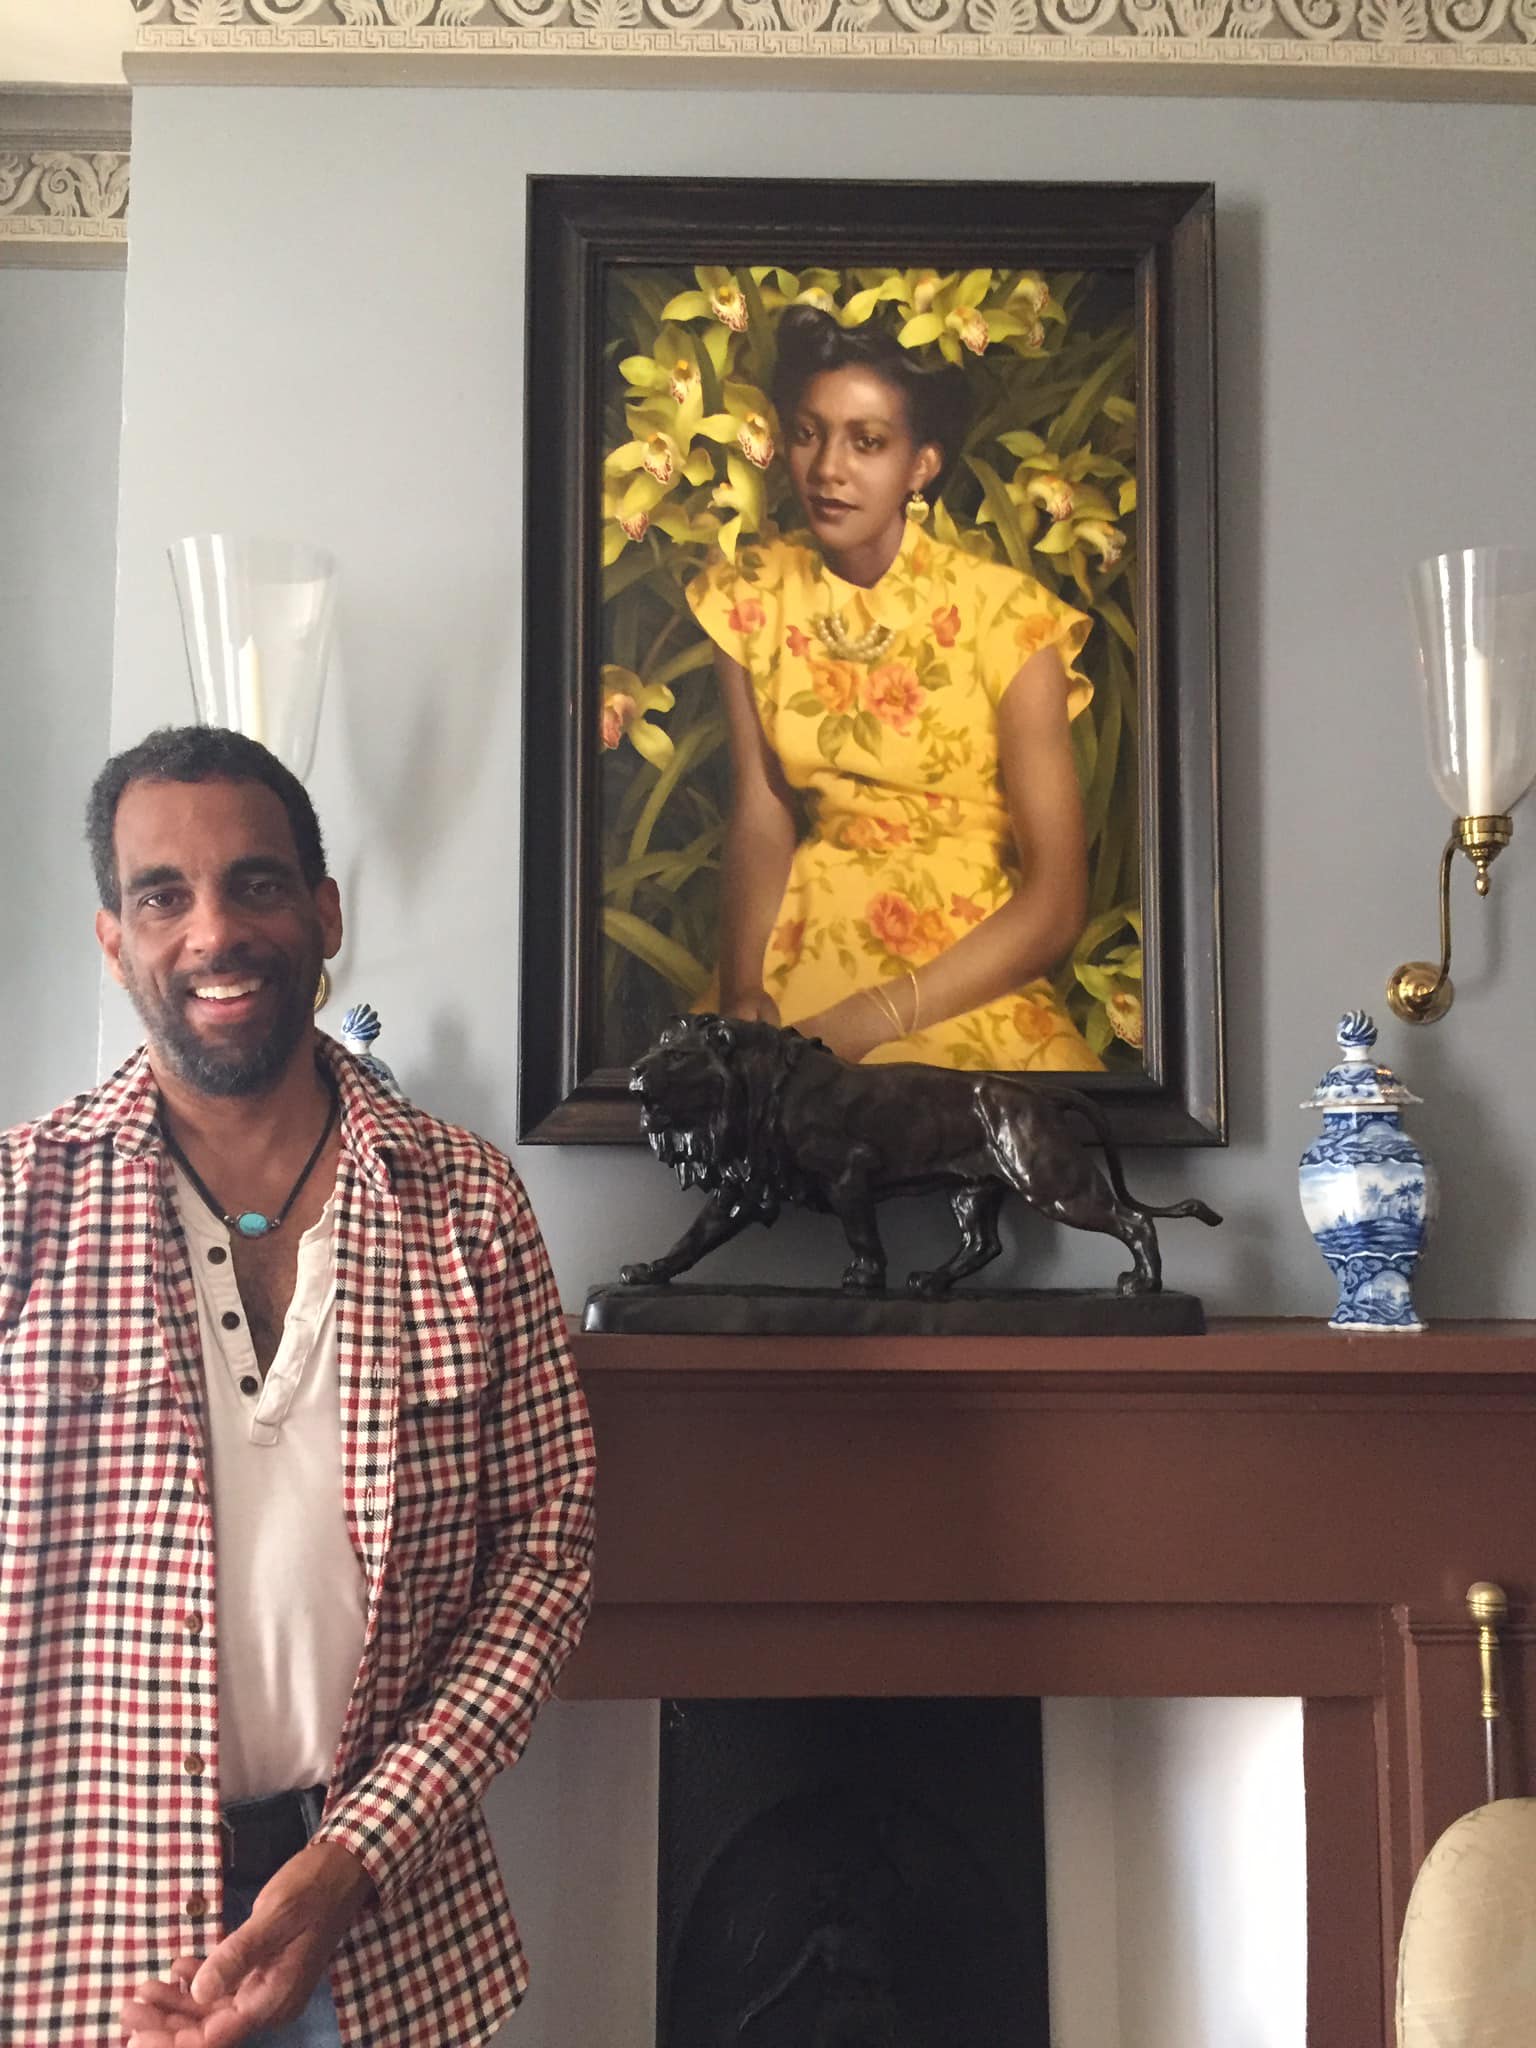 Timmie with “Wild Orchid,” a shrine to his mother, in his home.